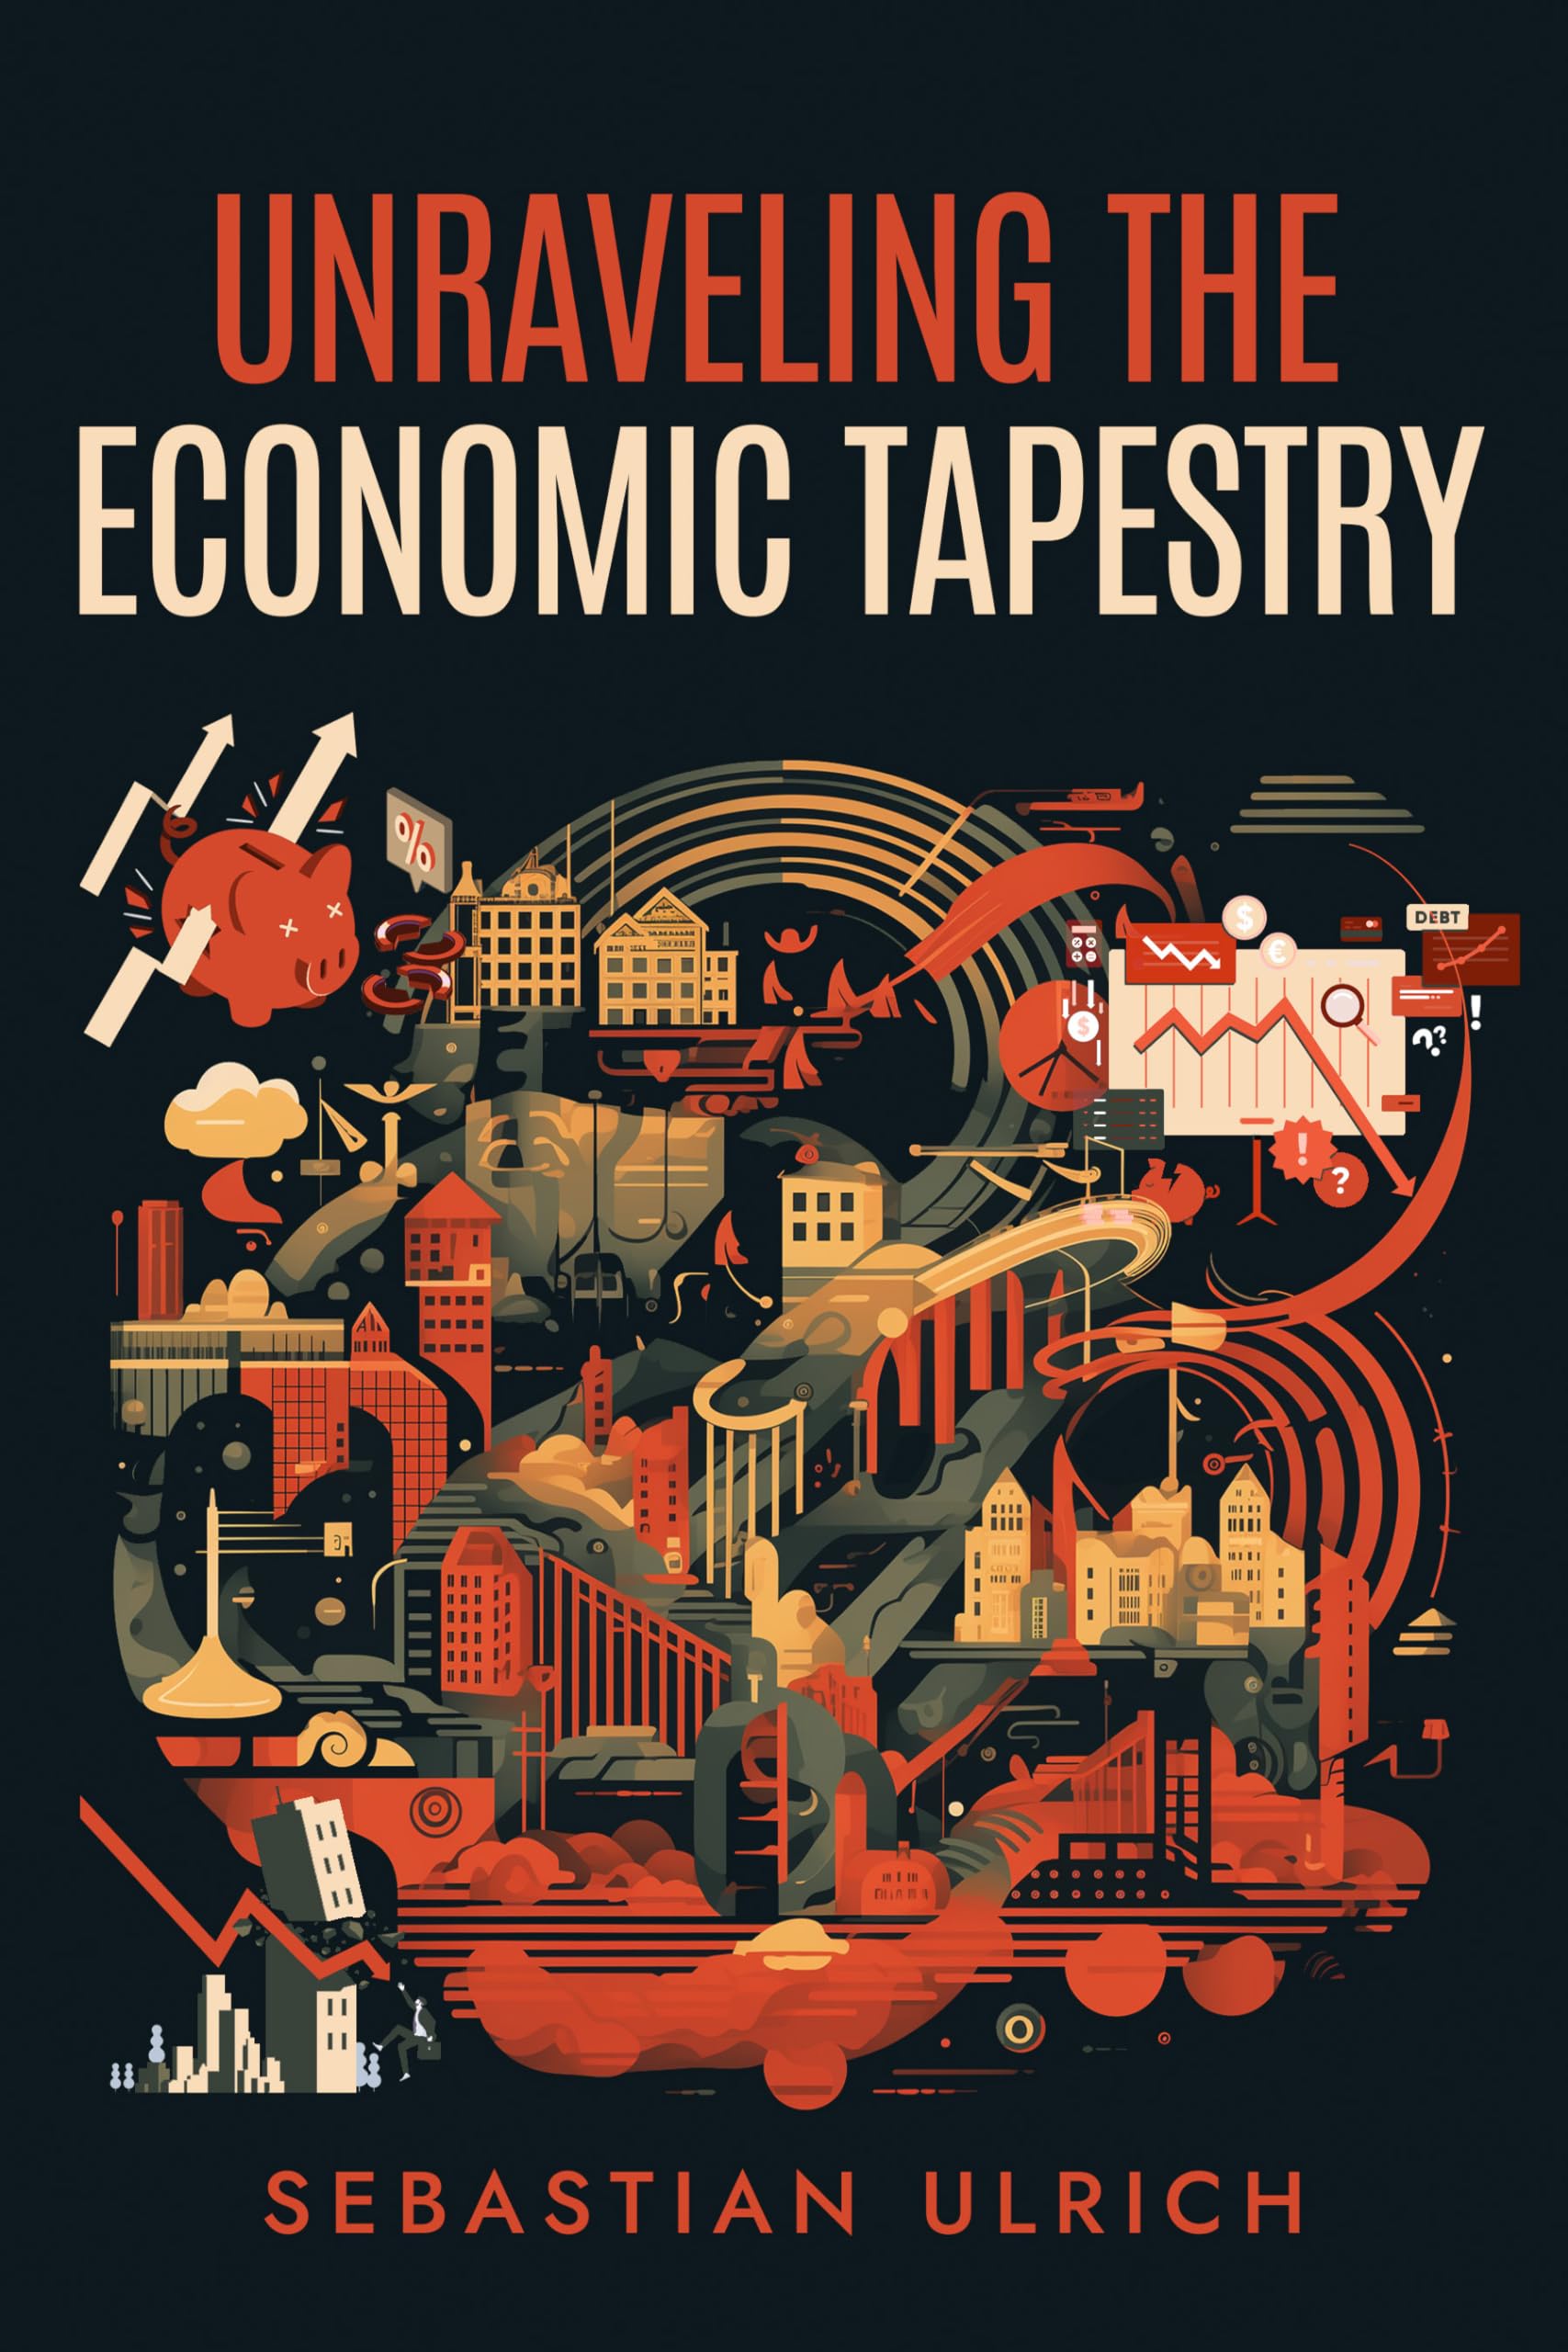 Unraveling the Economic Tapestry